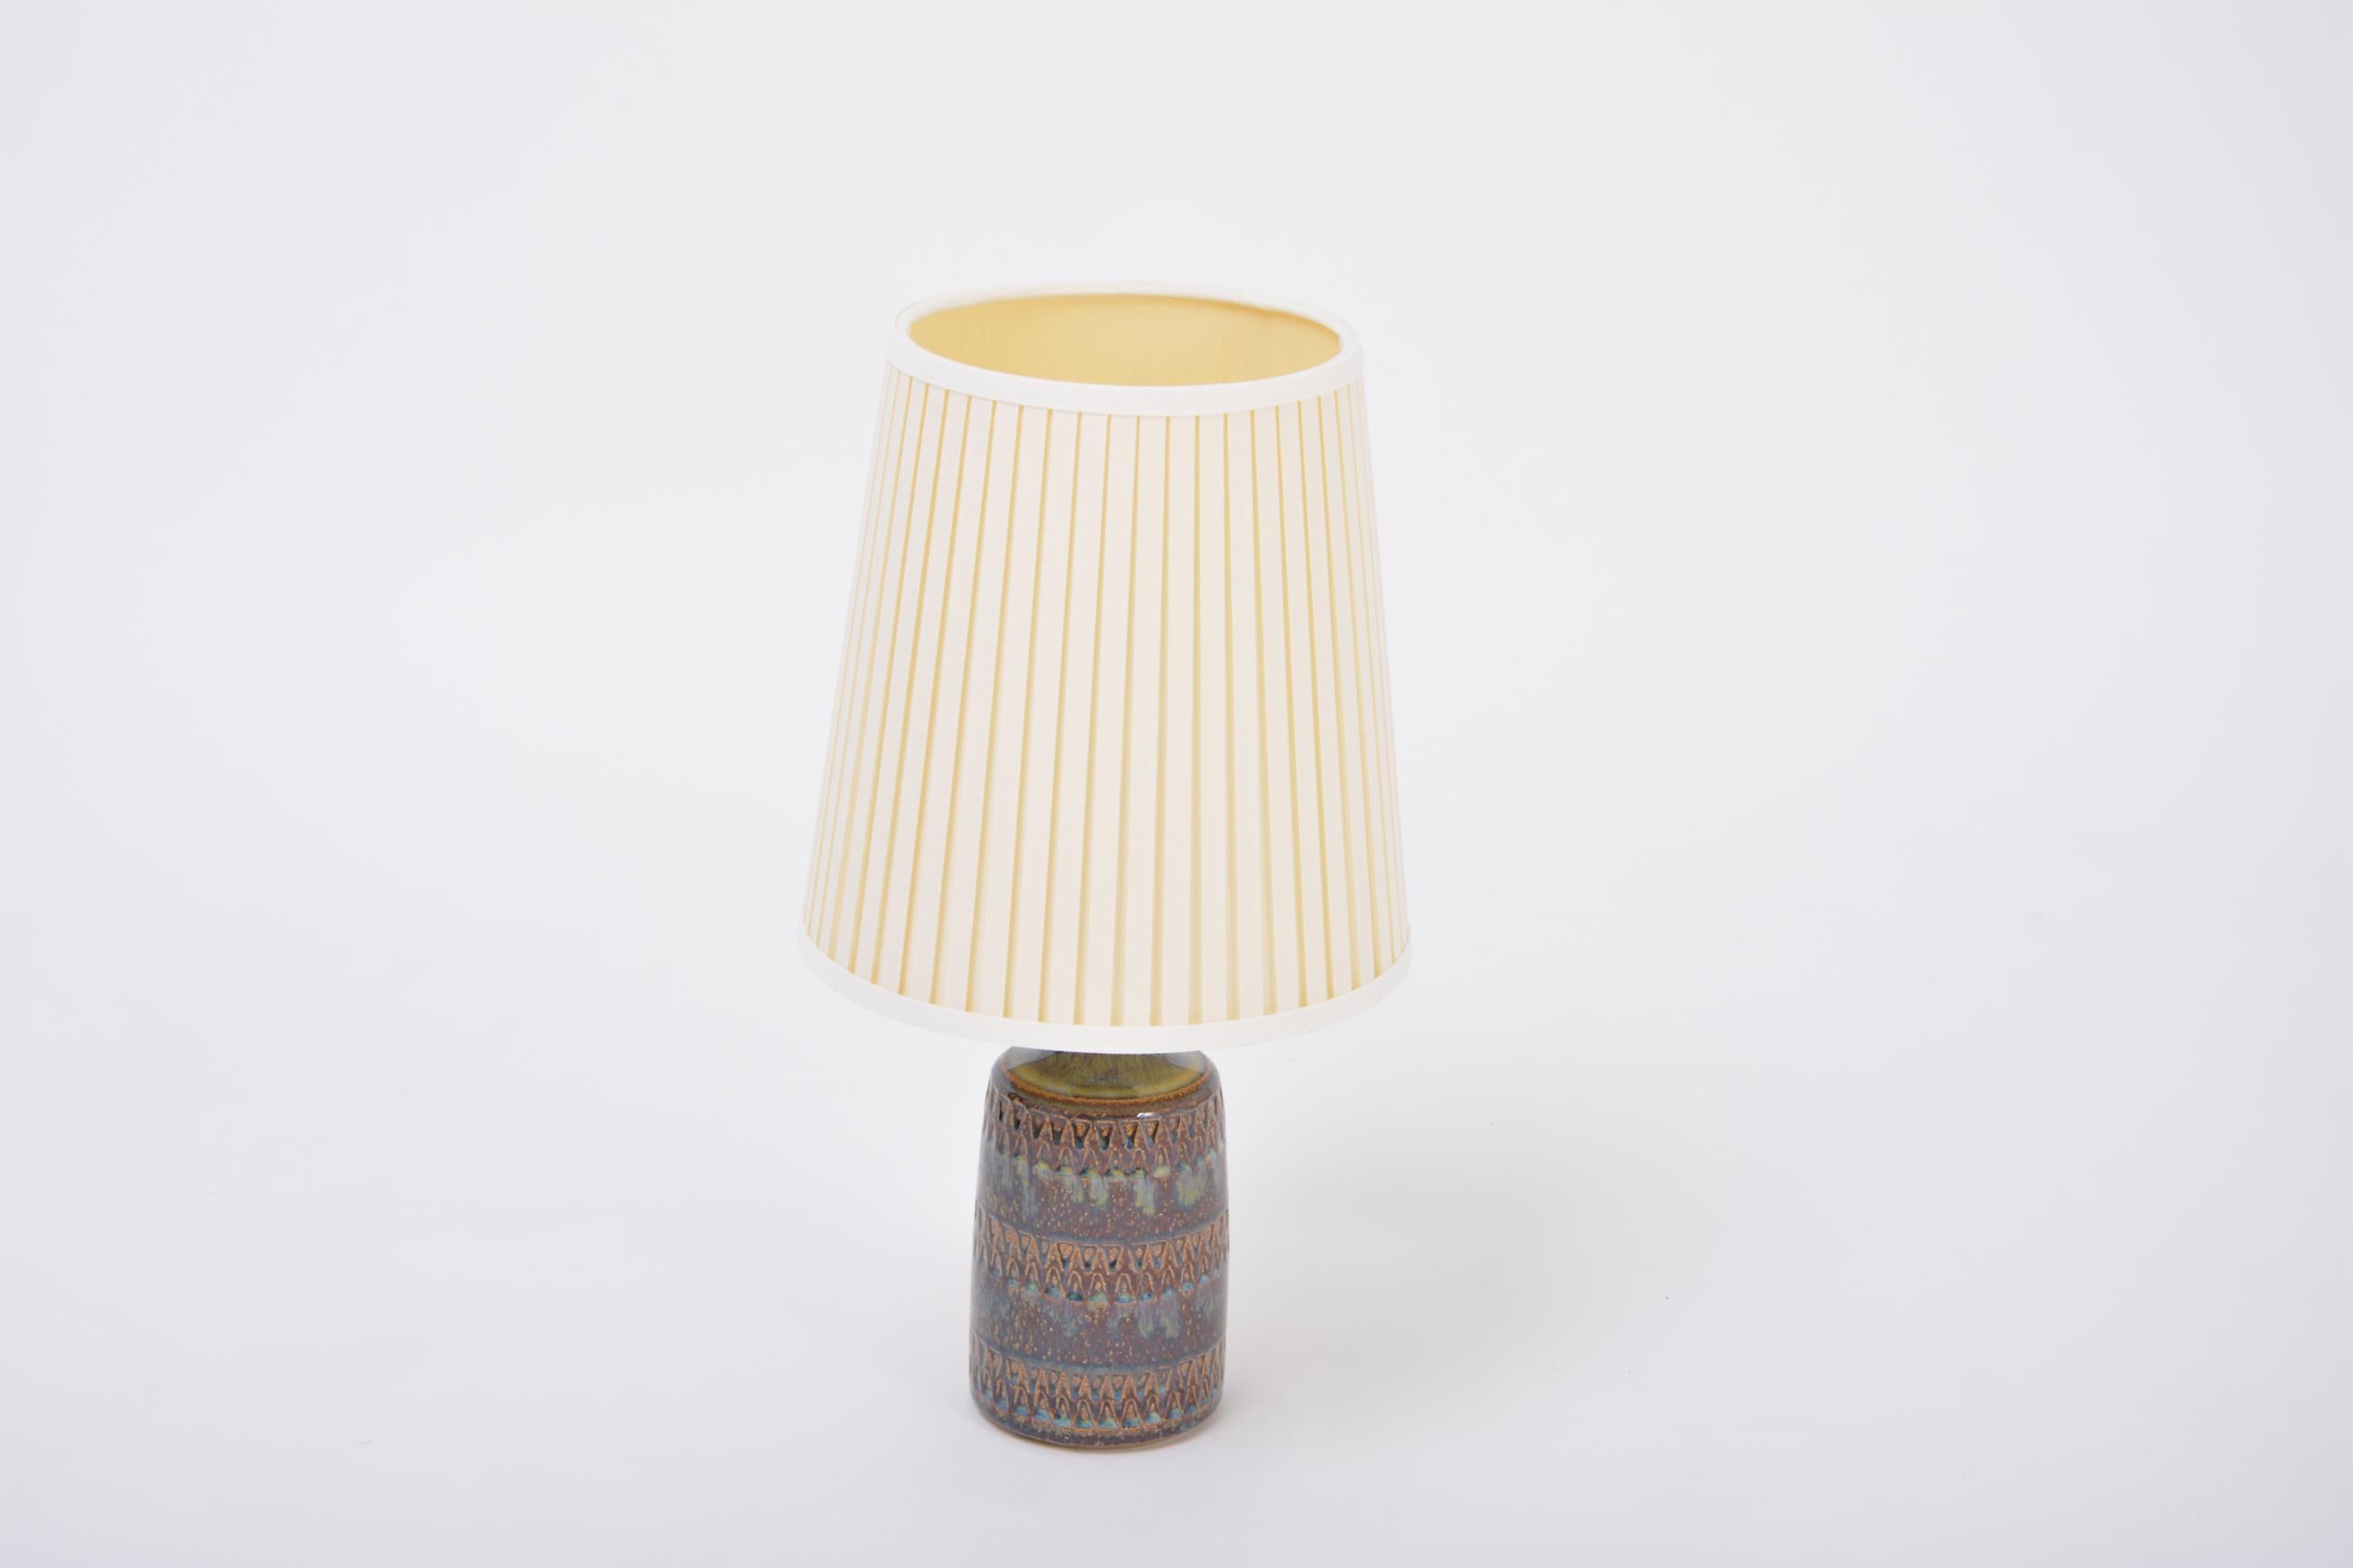 Hand Made Danish Mid-Century ceramic table lamp model 3084 by Soholm Stentoj
Handmade and hand decorated Danish modern stoneware table lamp manufactured by Søholm Stentøj on the Danish island of Bornholm in the 1960s. Light blue glaze flows down